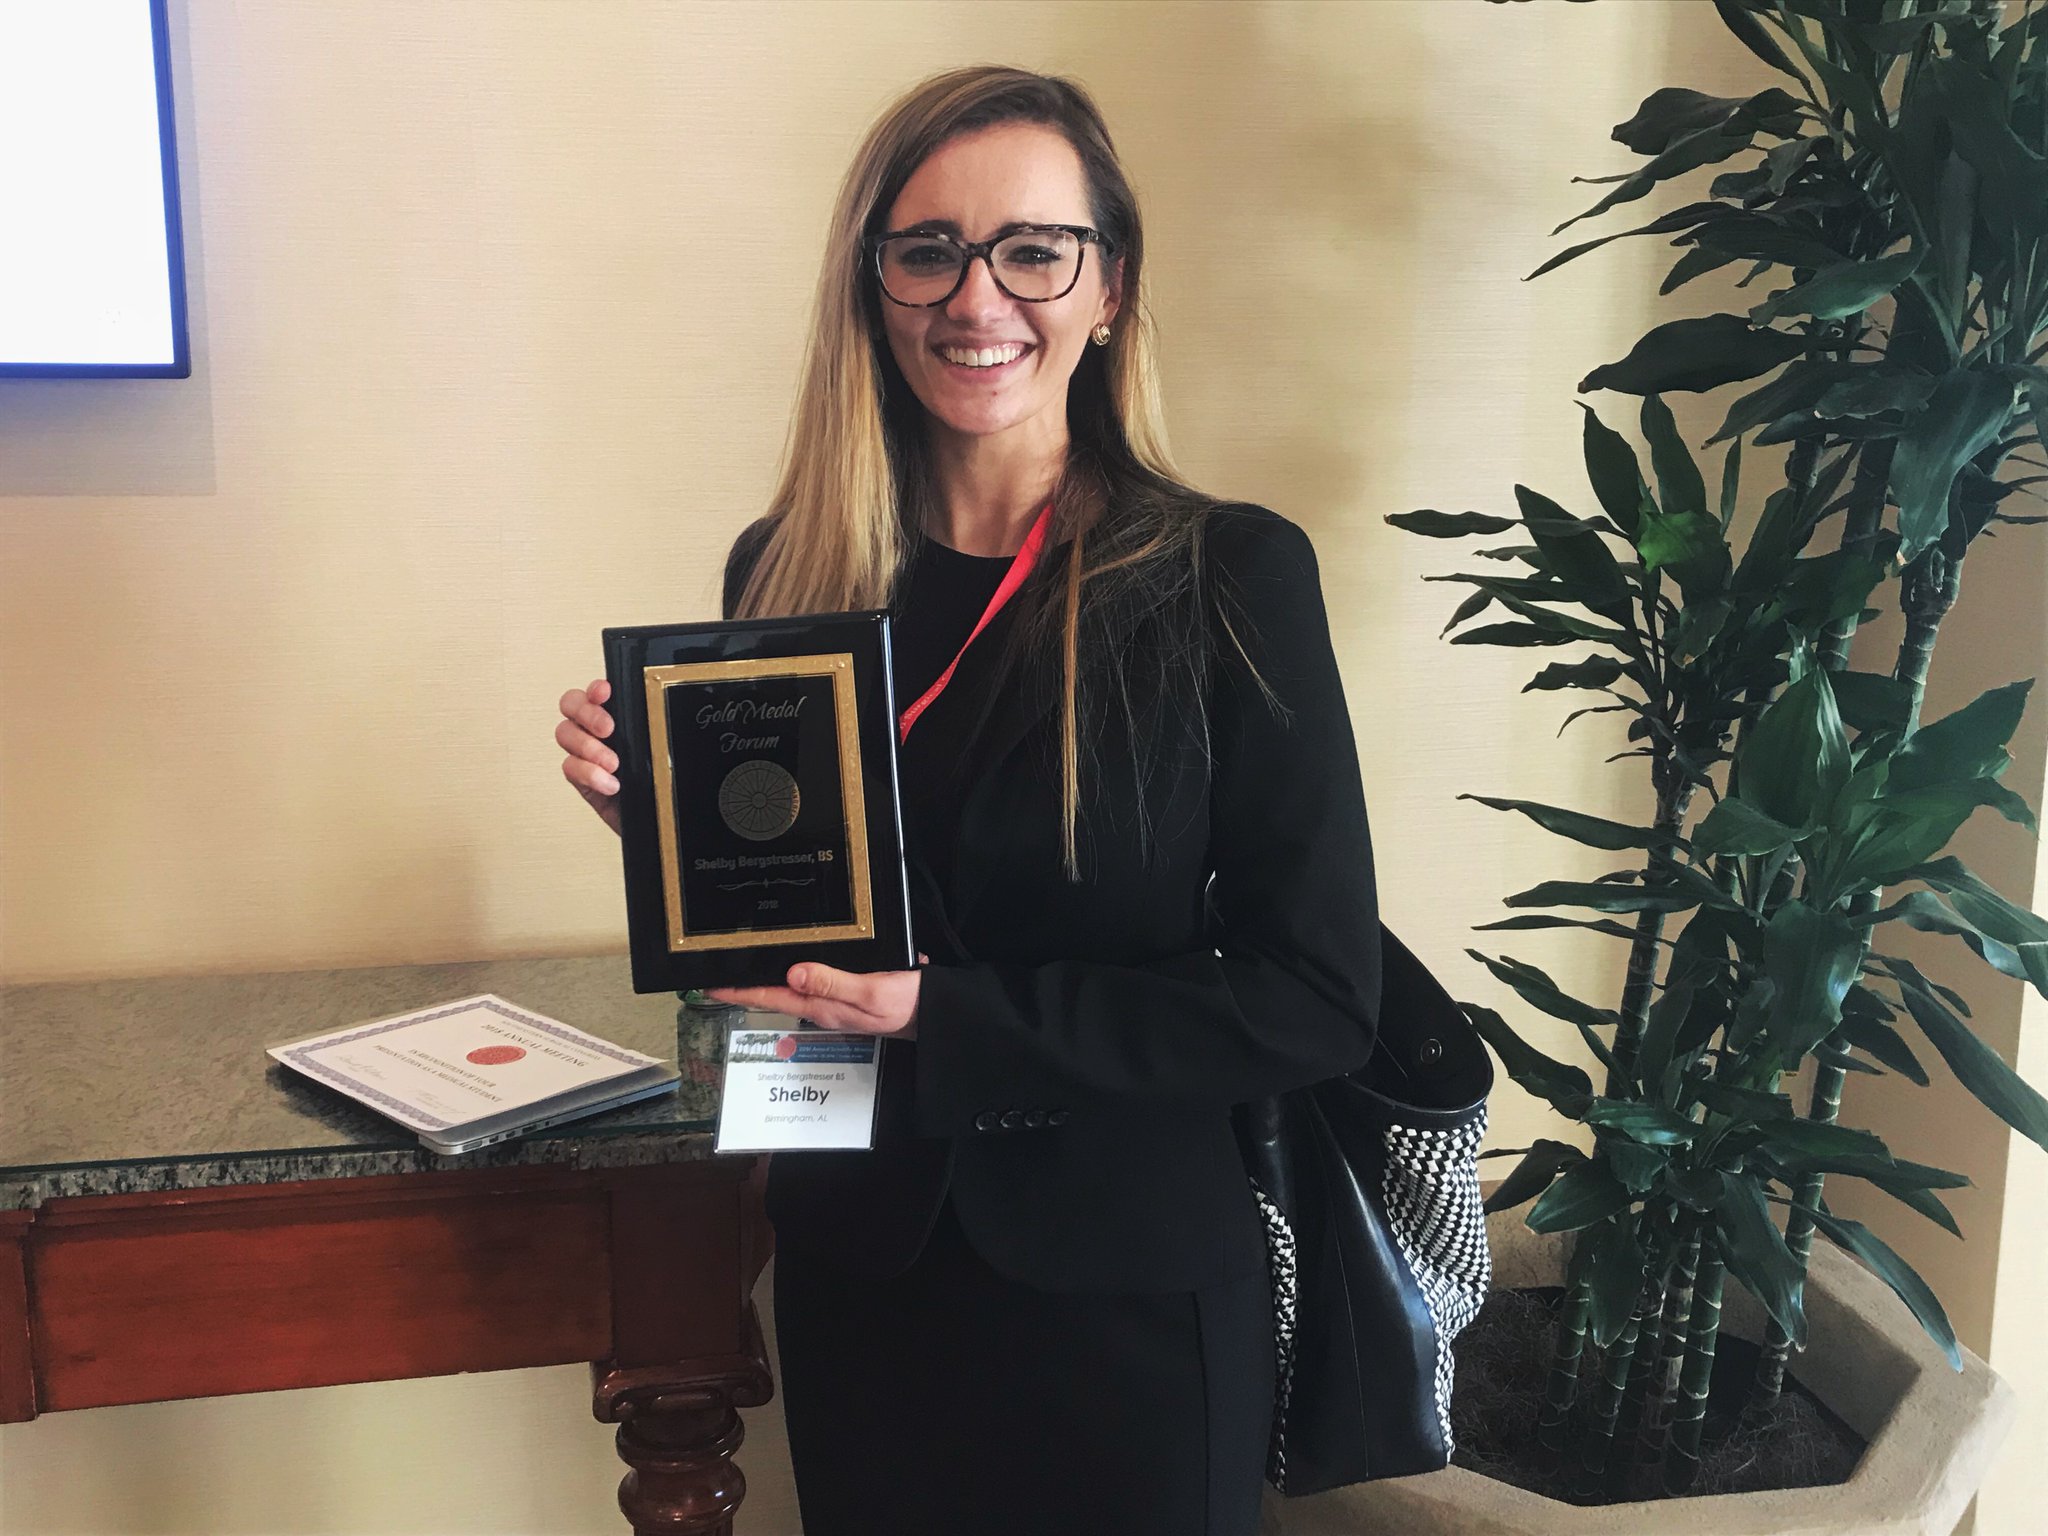 Shelby Bergstresser, MS3,  was the overall winner of the Southeastern Surgical Congress Gold Medal Award for the research she presented at the SESC 2018 Annual Meeting in Tampa, Florida.